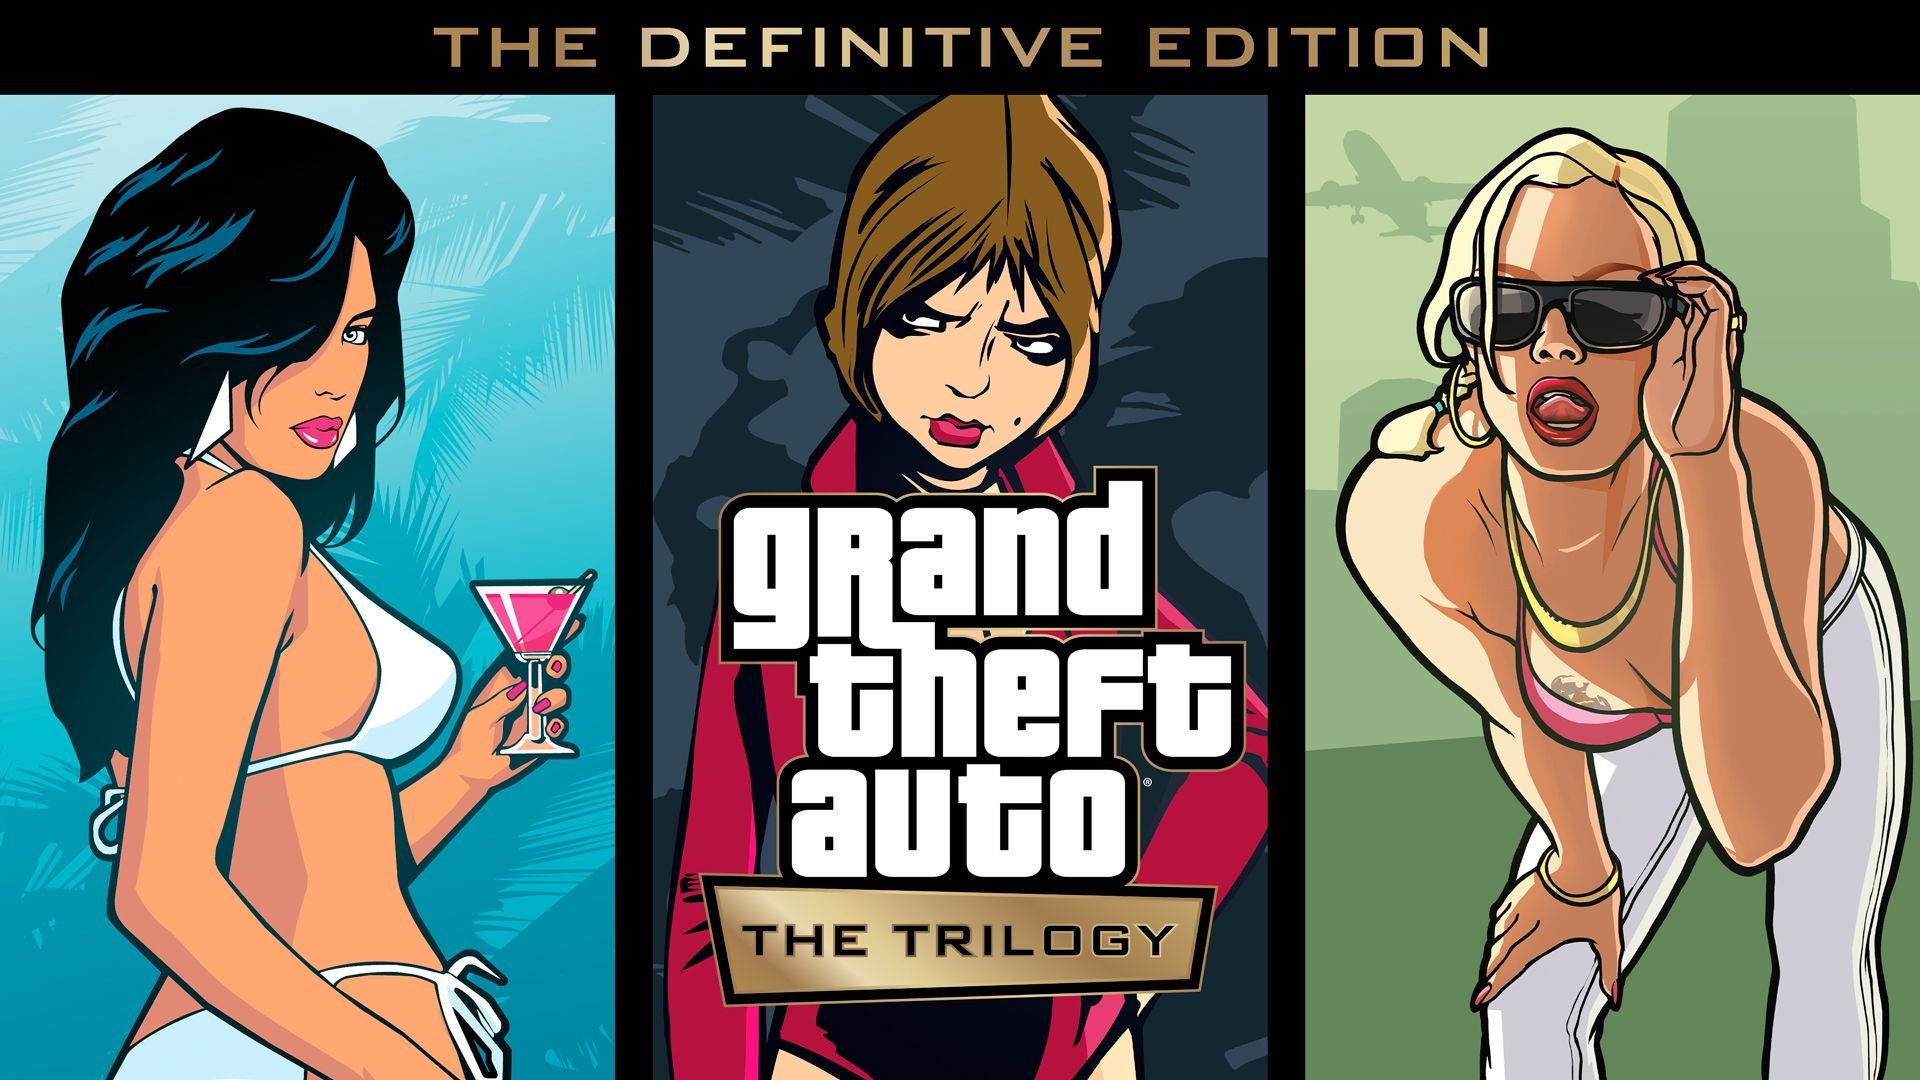 grand-theft-auto-the-trilogy-the-definitive-edition-key-art-0dd4-1958631